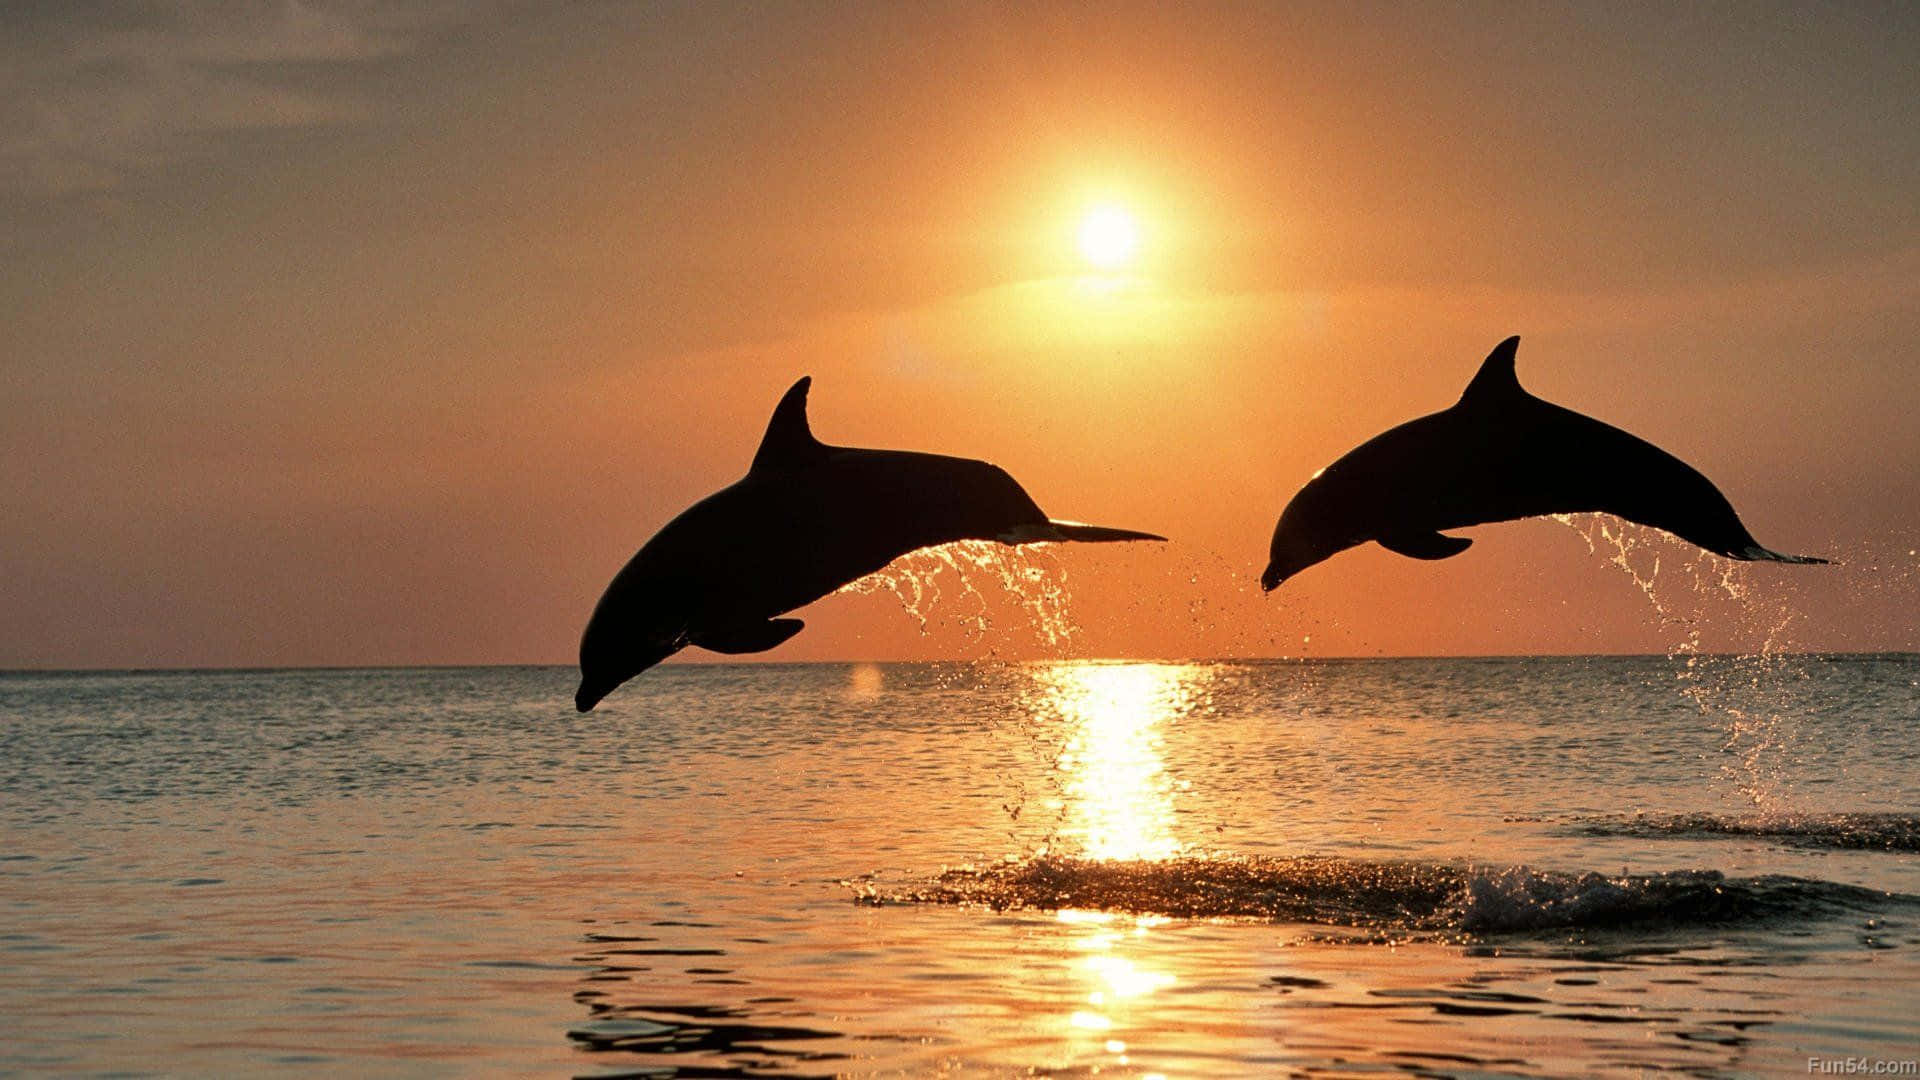 "Look at this peaceful sunset with a pair of playful dolphins" Wallpaper